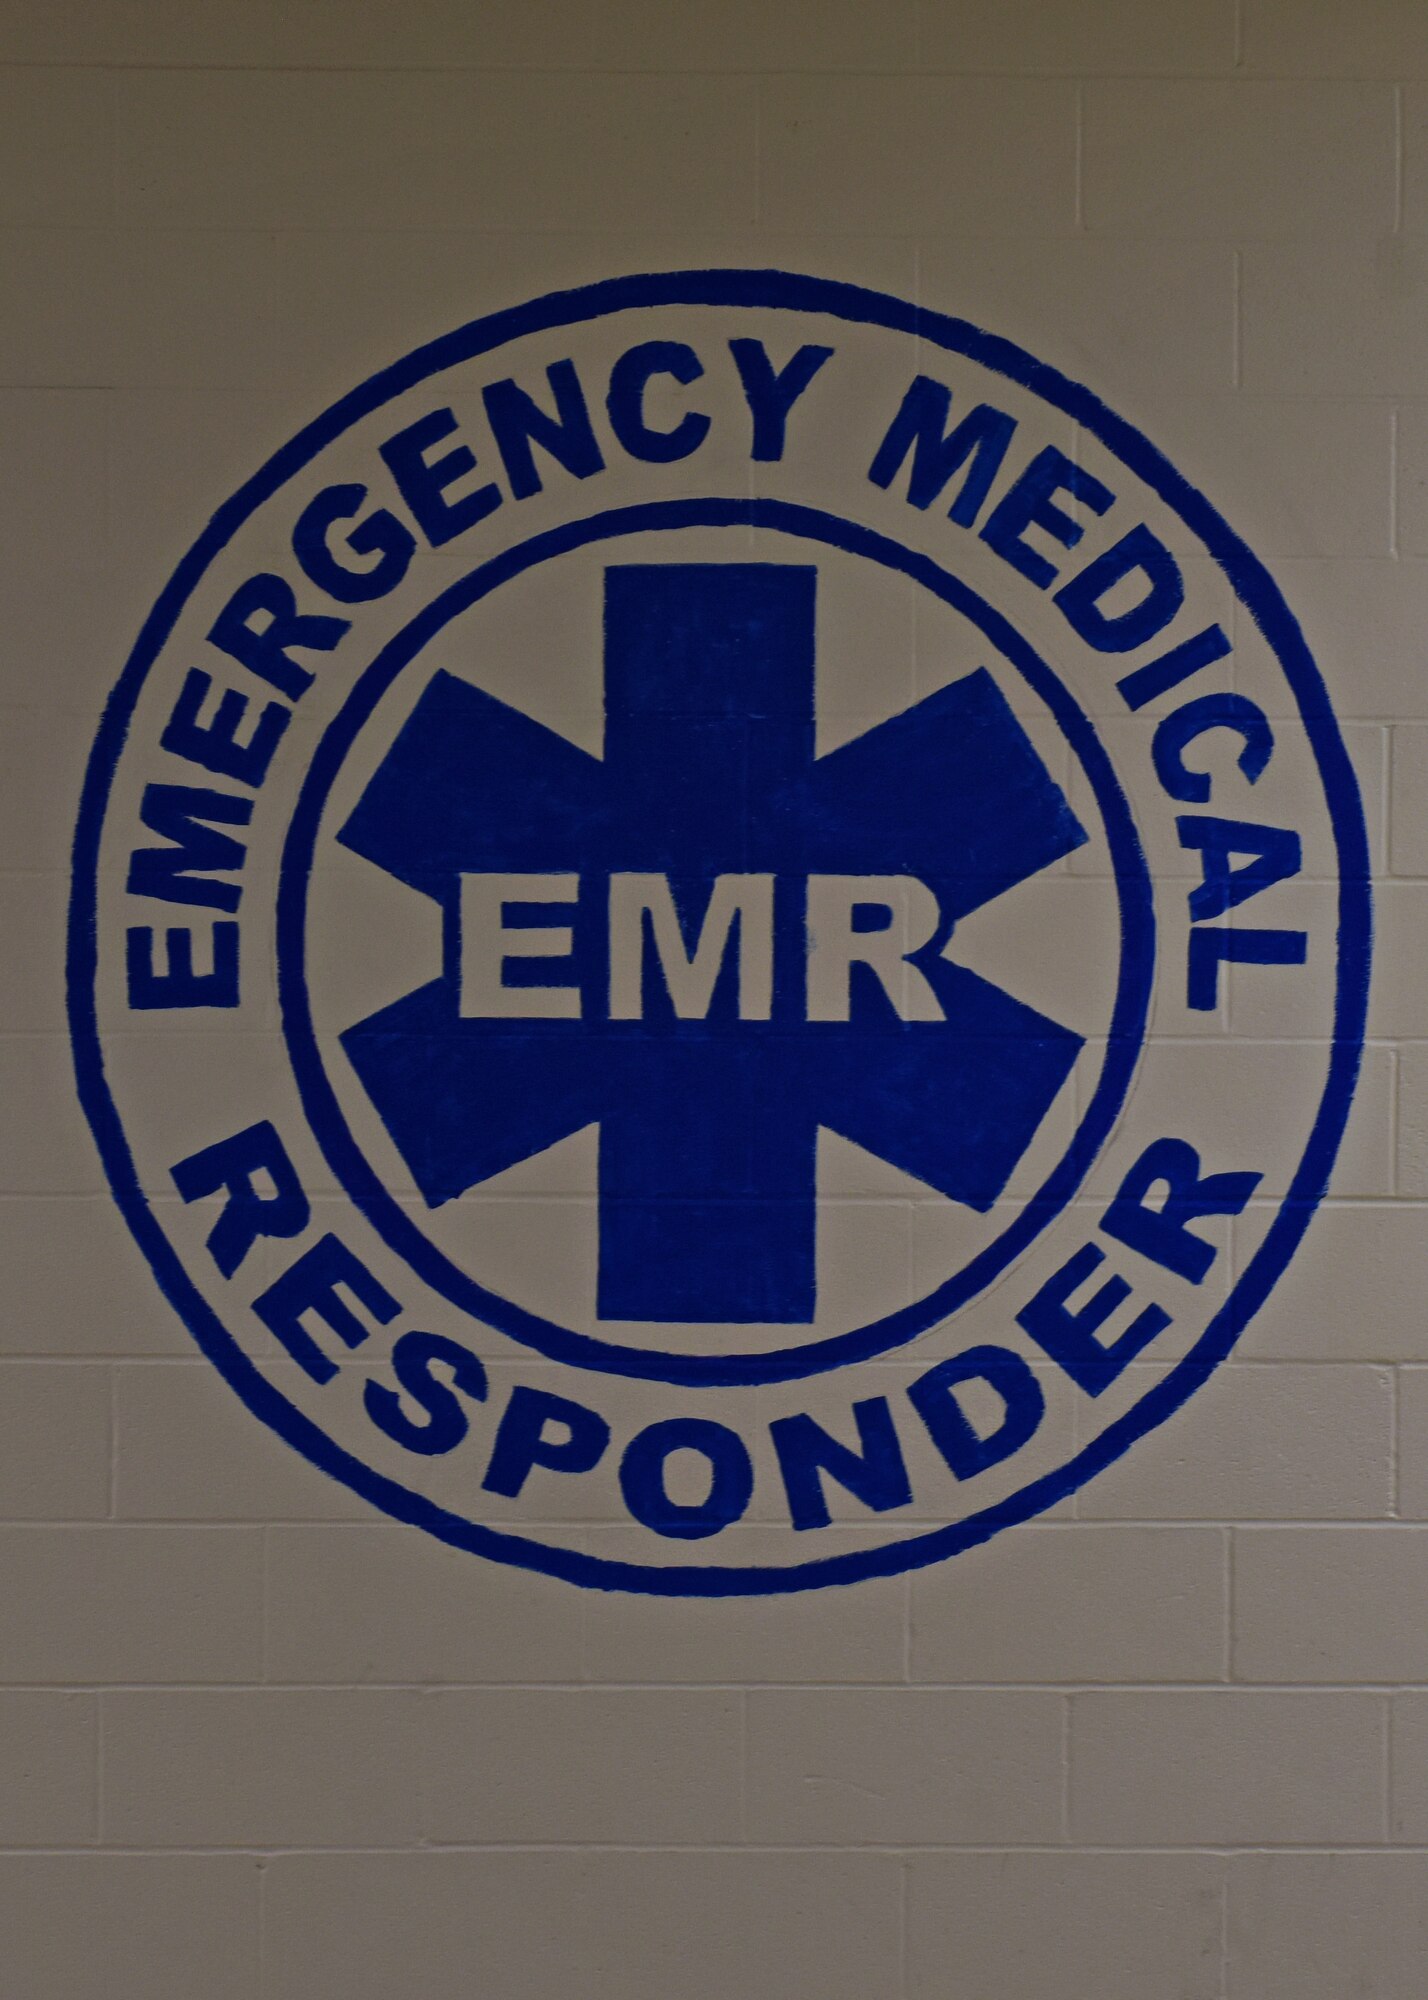 An emergency medical responder sign is displayed on a wall at the Louis F. Garland Department of Defense Fire Academy, Goodfellow Air Force Base, Texas, Oct. 13, 2022. EMR is the first course students take during their three months of fire training. (U.S. Air Force photo by Airman 1st Class Sarah Williams)